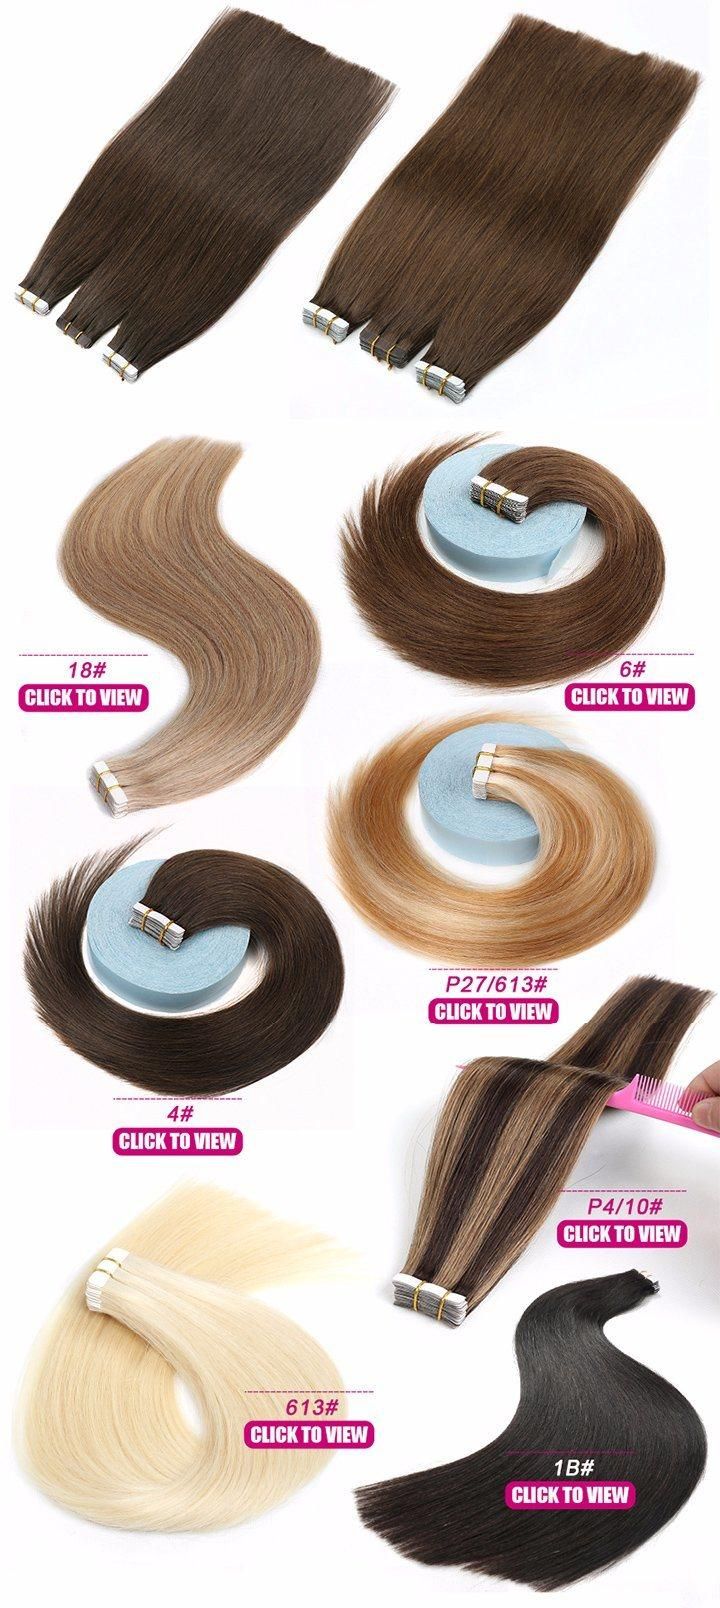 Piano Color Remy Tape in Hair Extensions, Tape Weft Hair, Seamless Skin Weft Hair